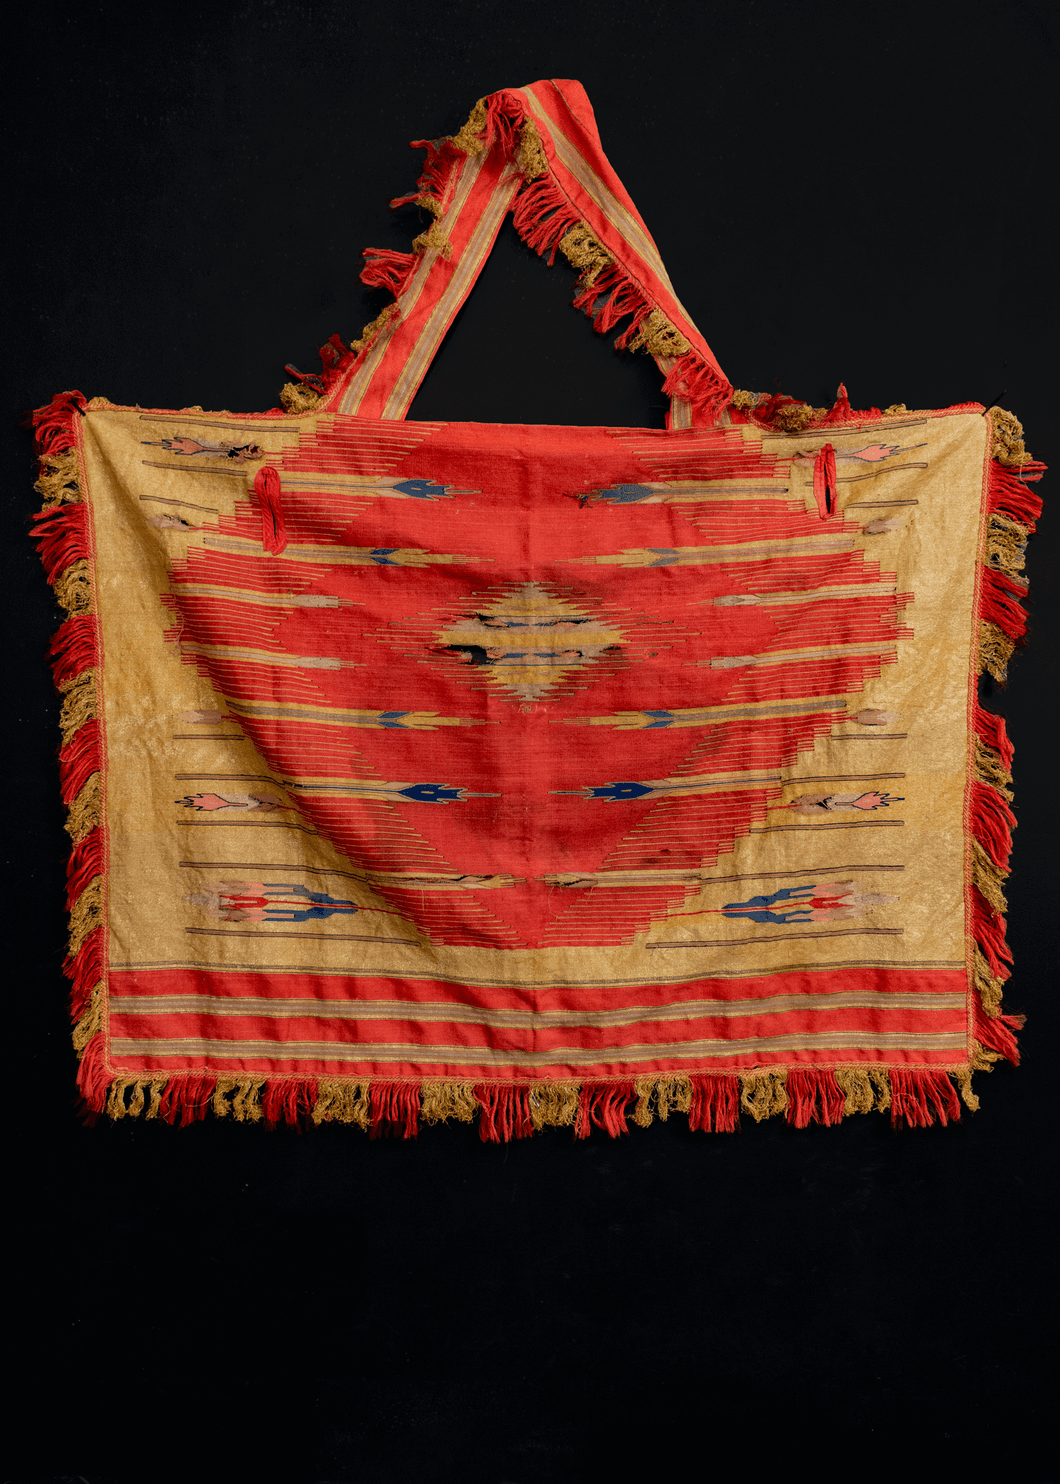 Syrian horse-trapping woven in red and gold metallic thread, in fair condition, with some wear throughout